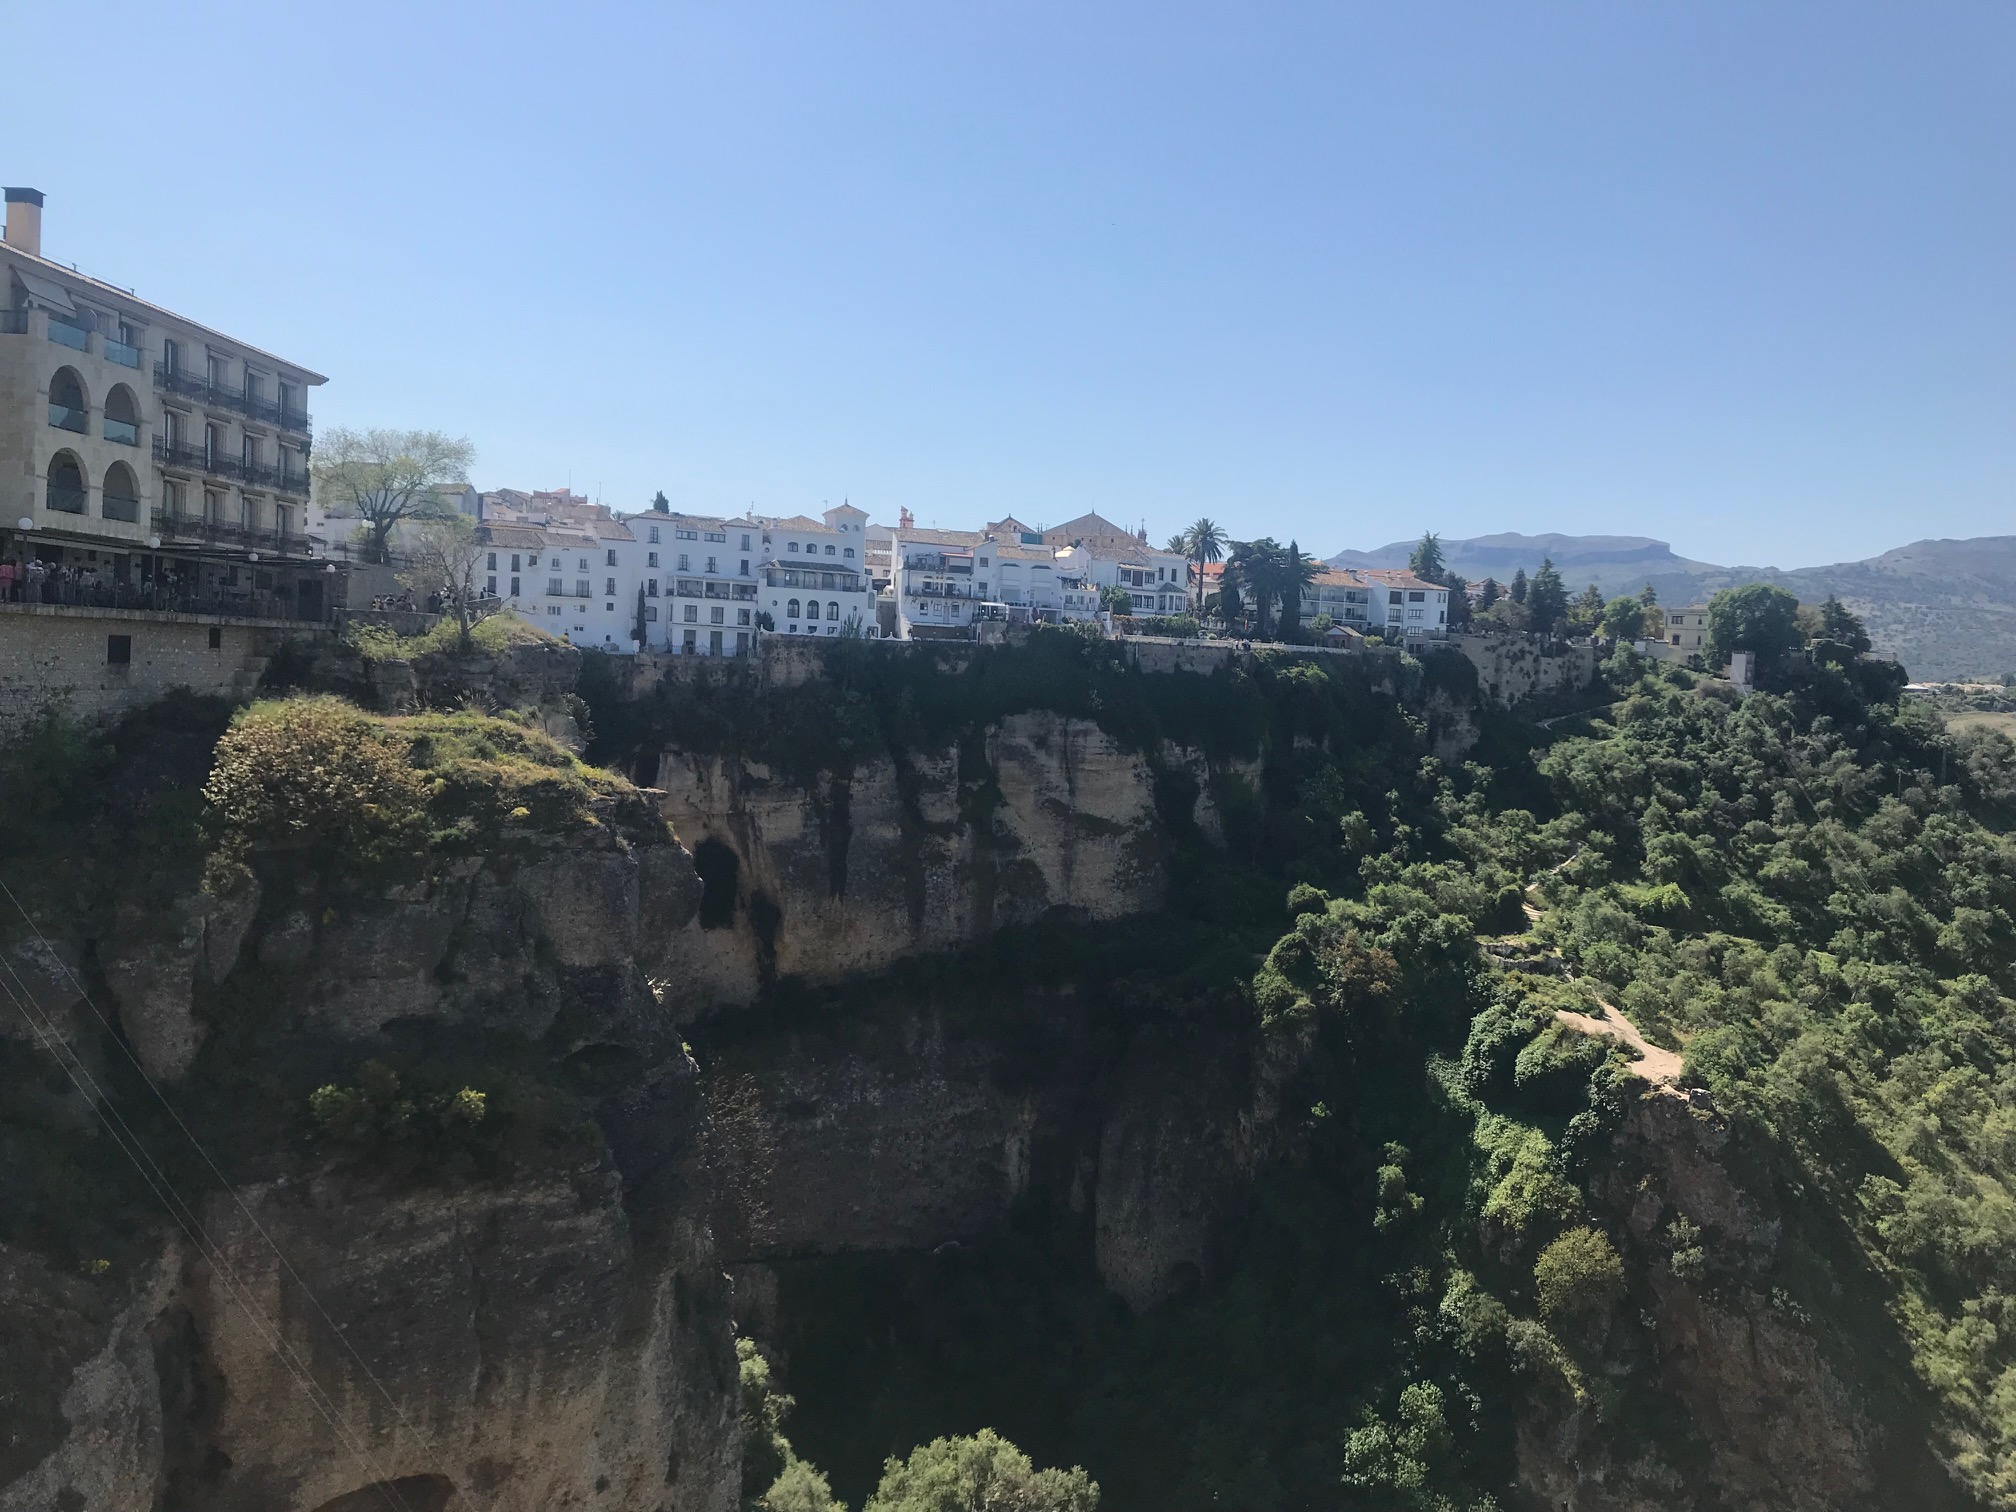 The cliffs and hanging houses of Ronda, Spain